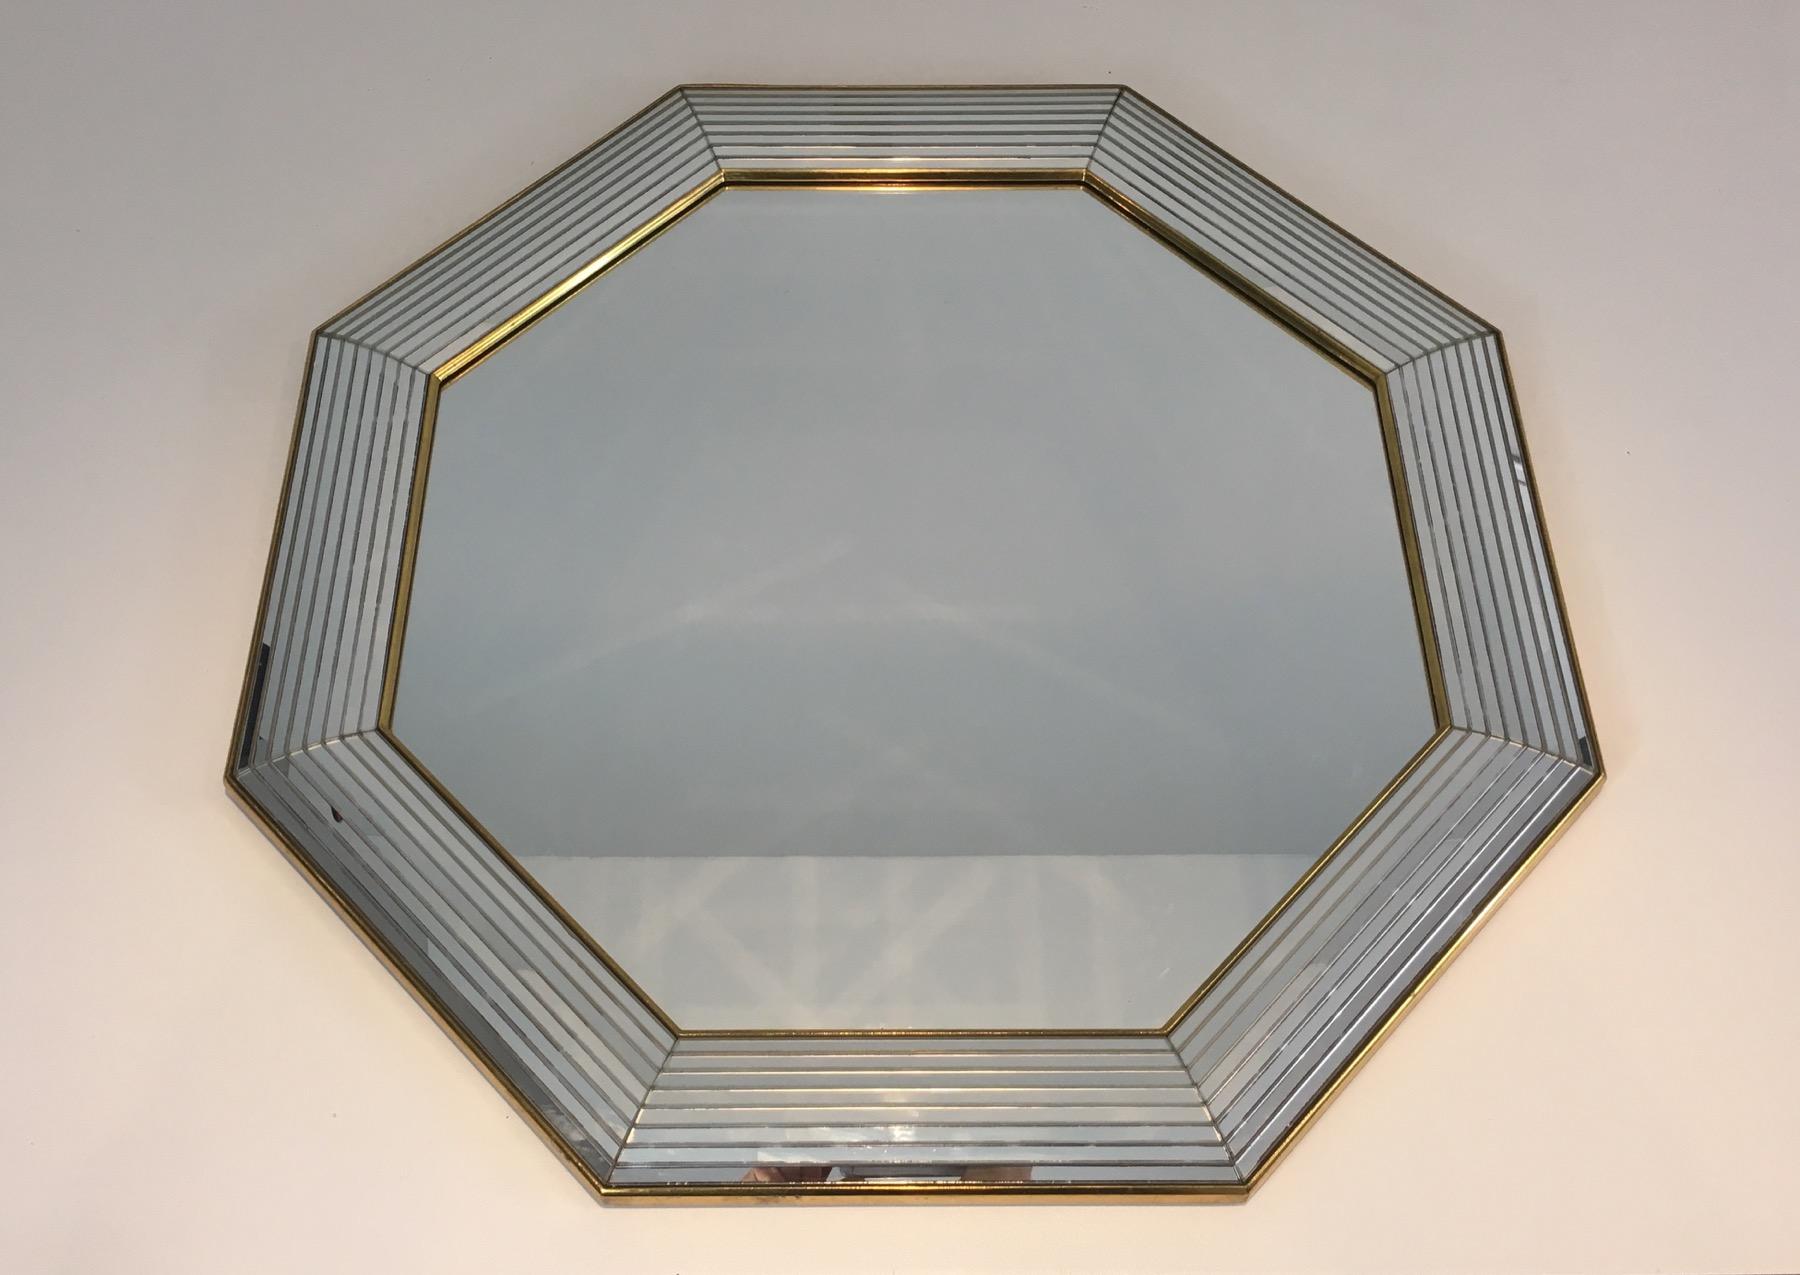 This decorative octagonal mirror is made of mirror and Lucite on the sides, separated by gilt wooden elements. This is a French work, circa 1970.